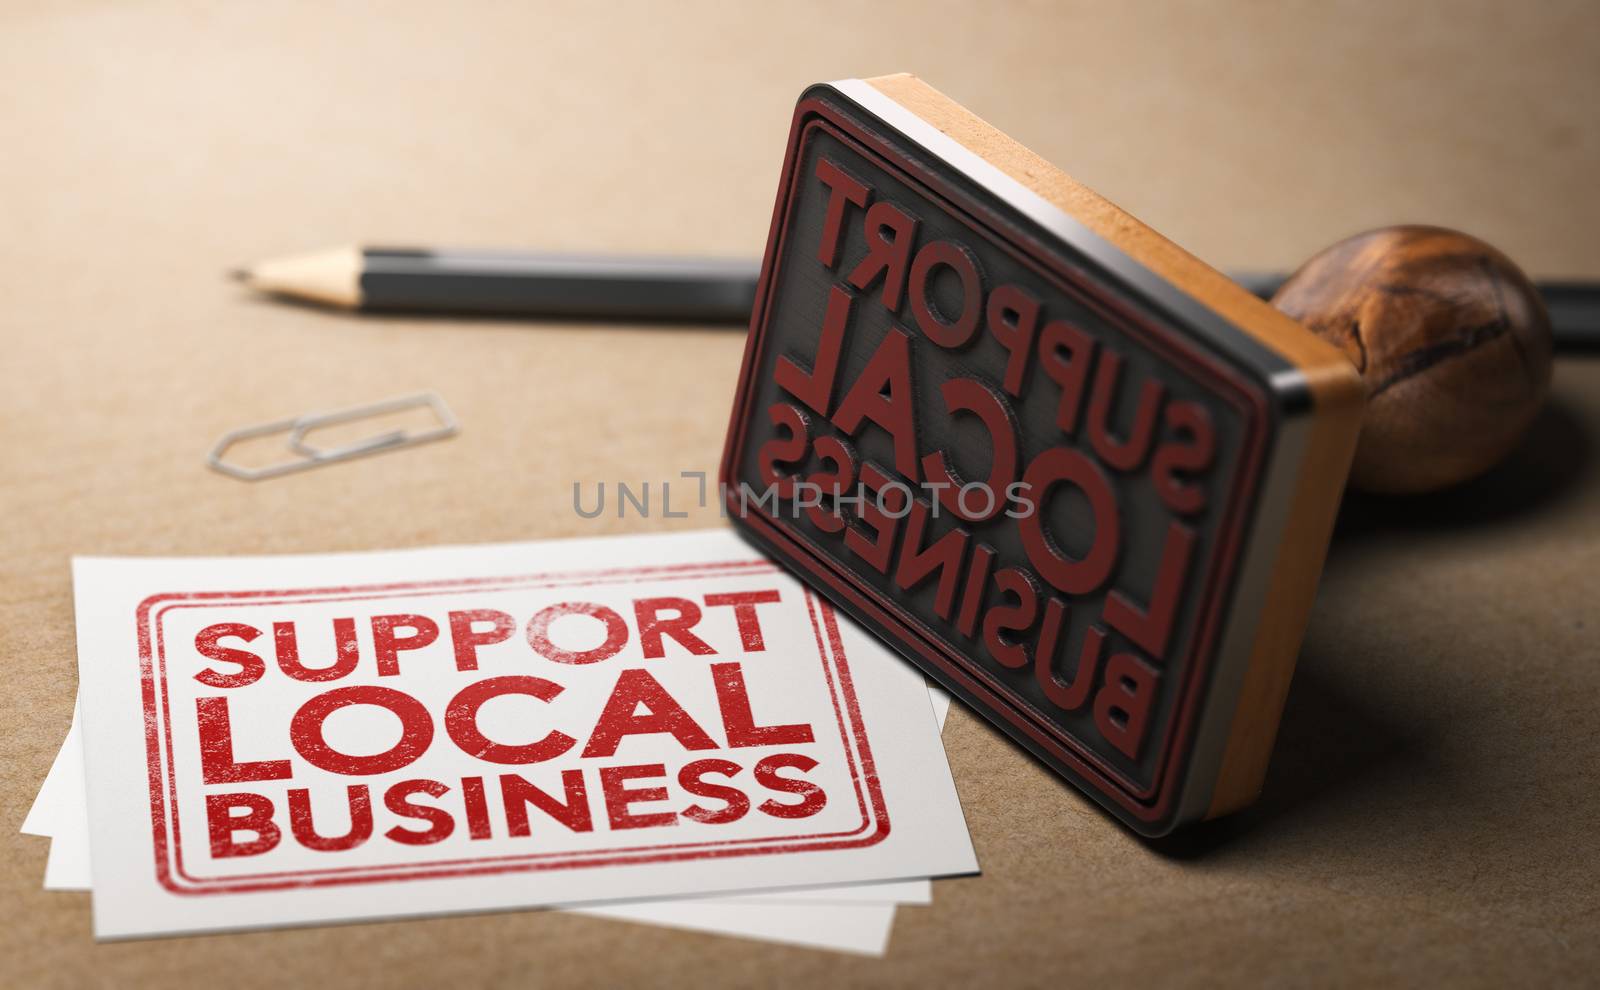 Support Local Business, Help Small Businesses by Olivier-Le-Moal